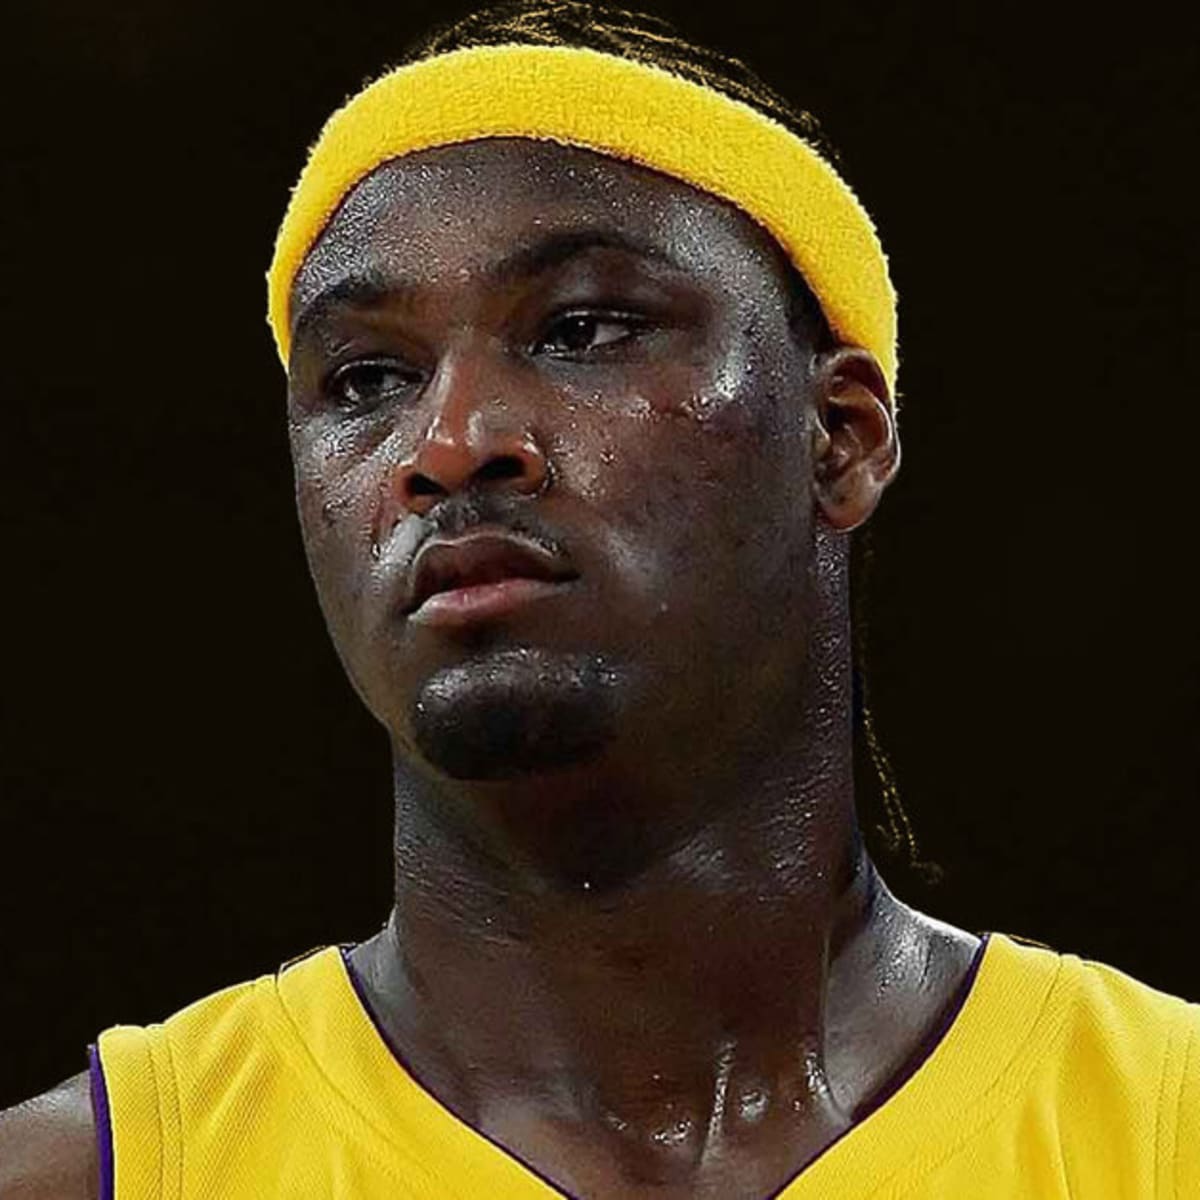 Kwame Brown urges young NBA players to be careful with money